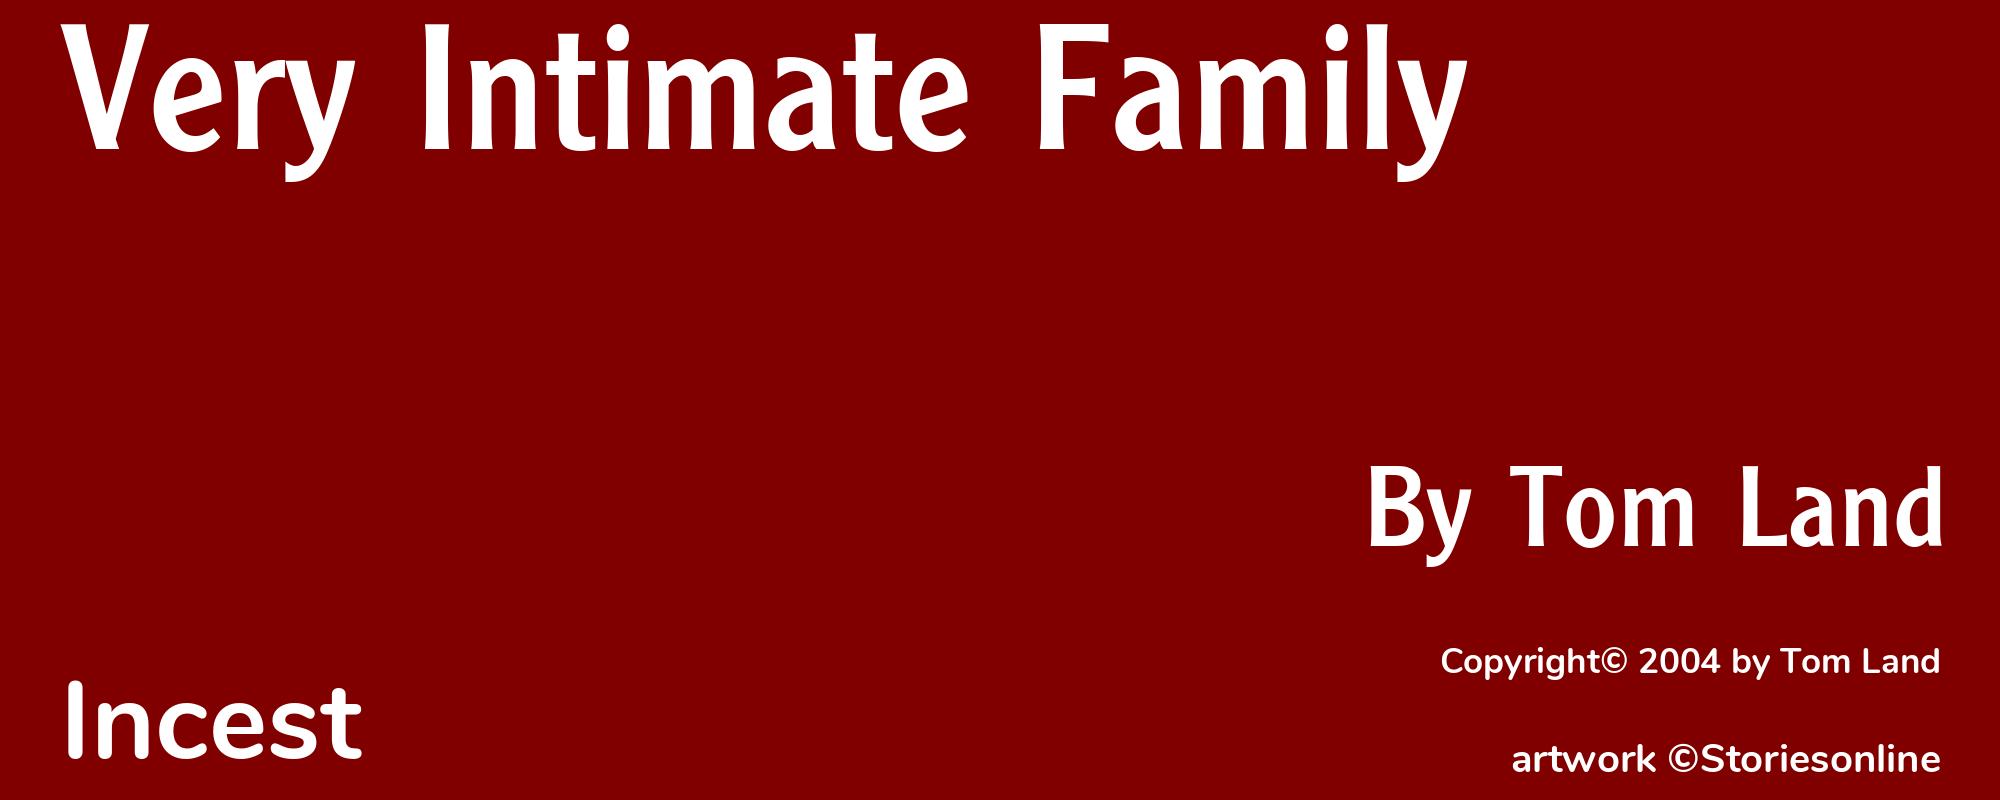 Very Intimate Family - Cover